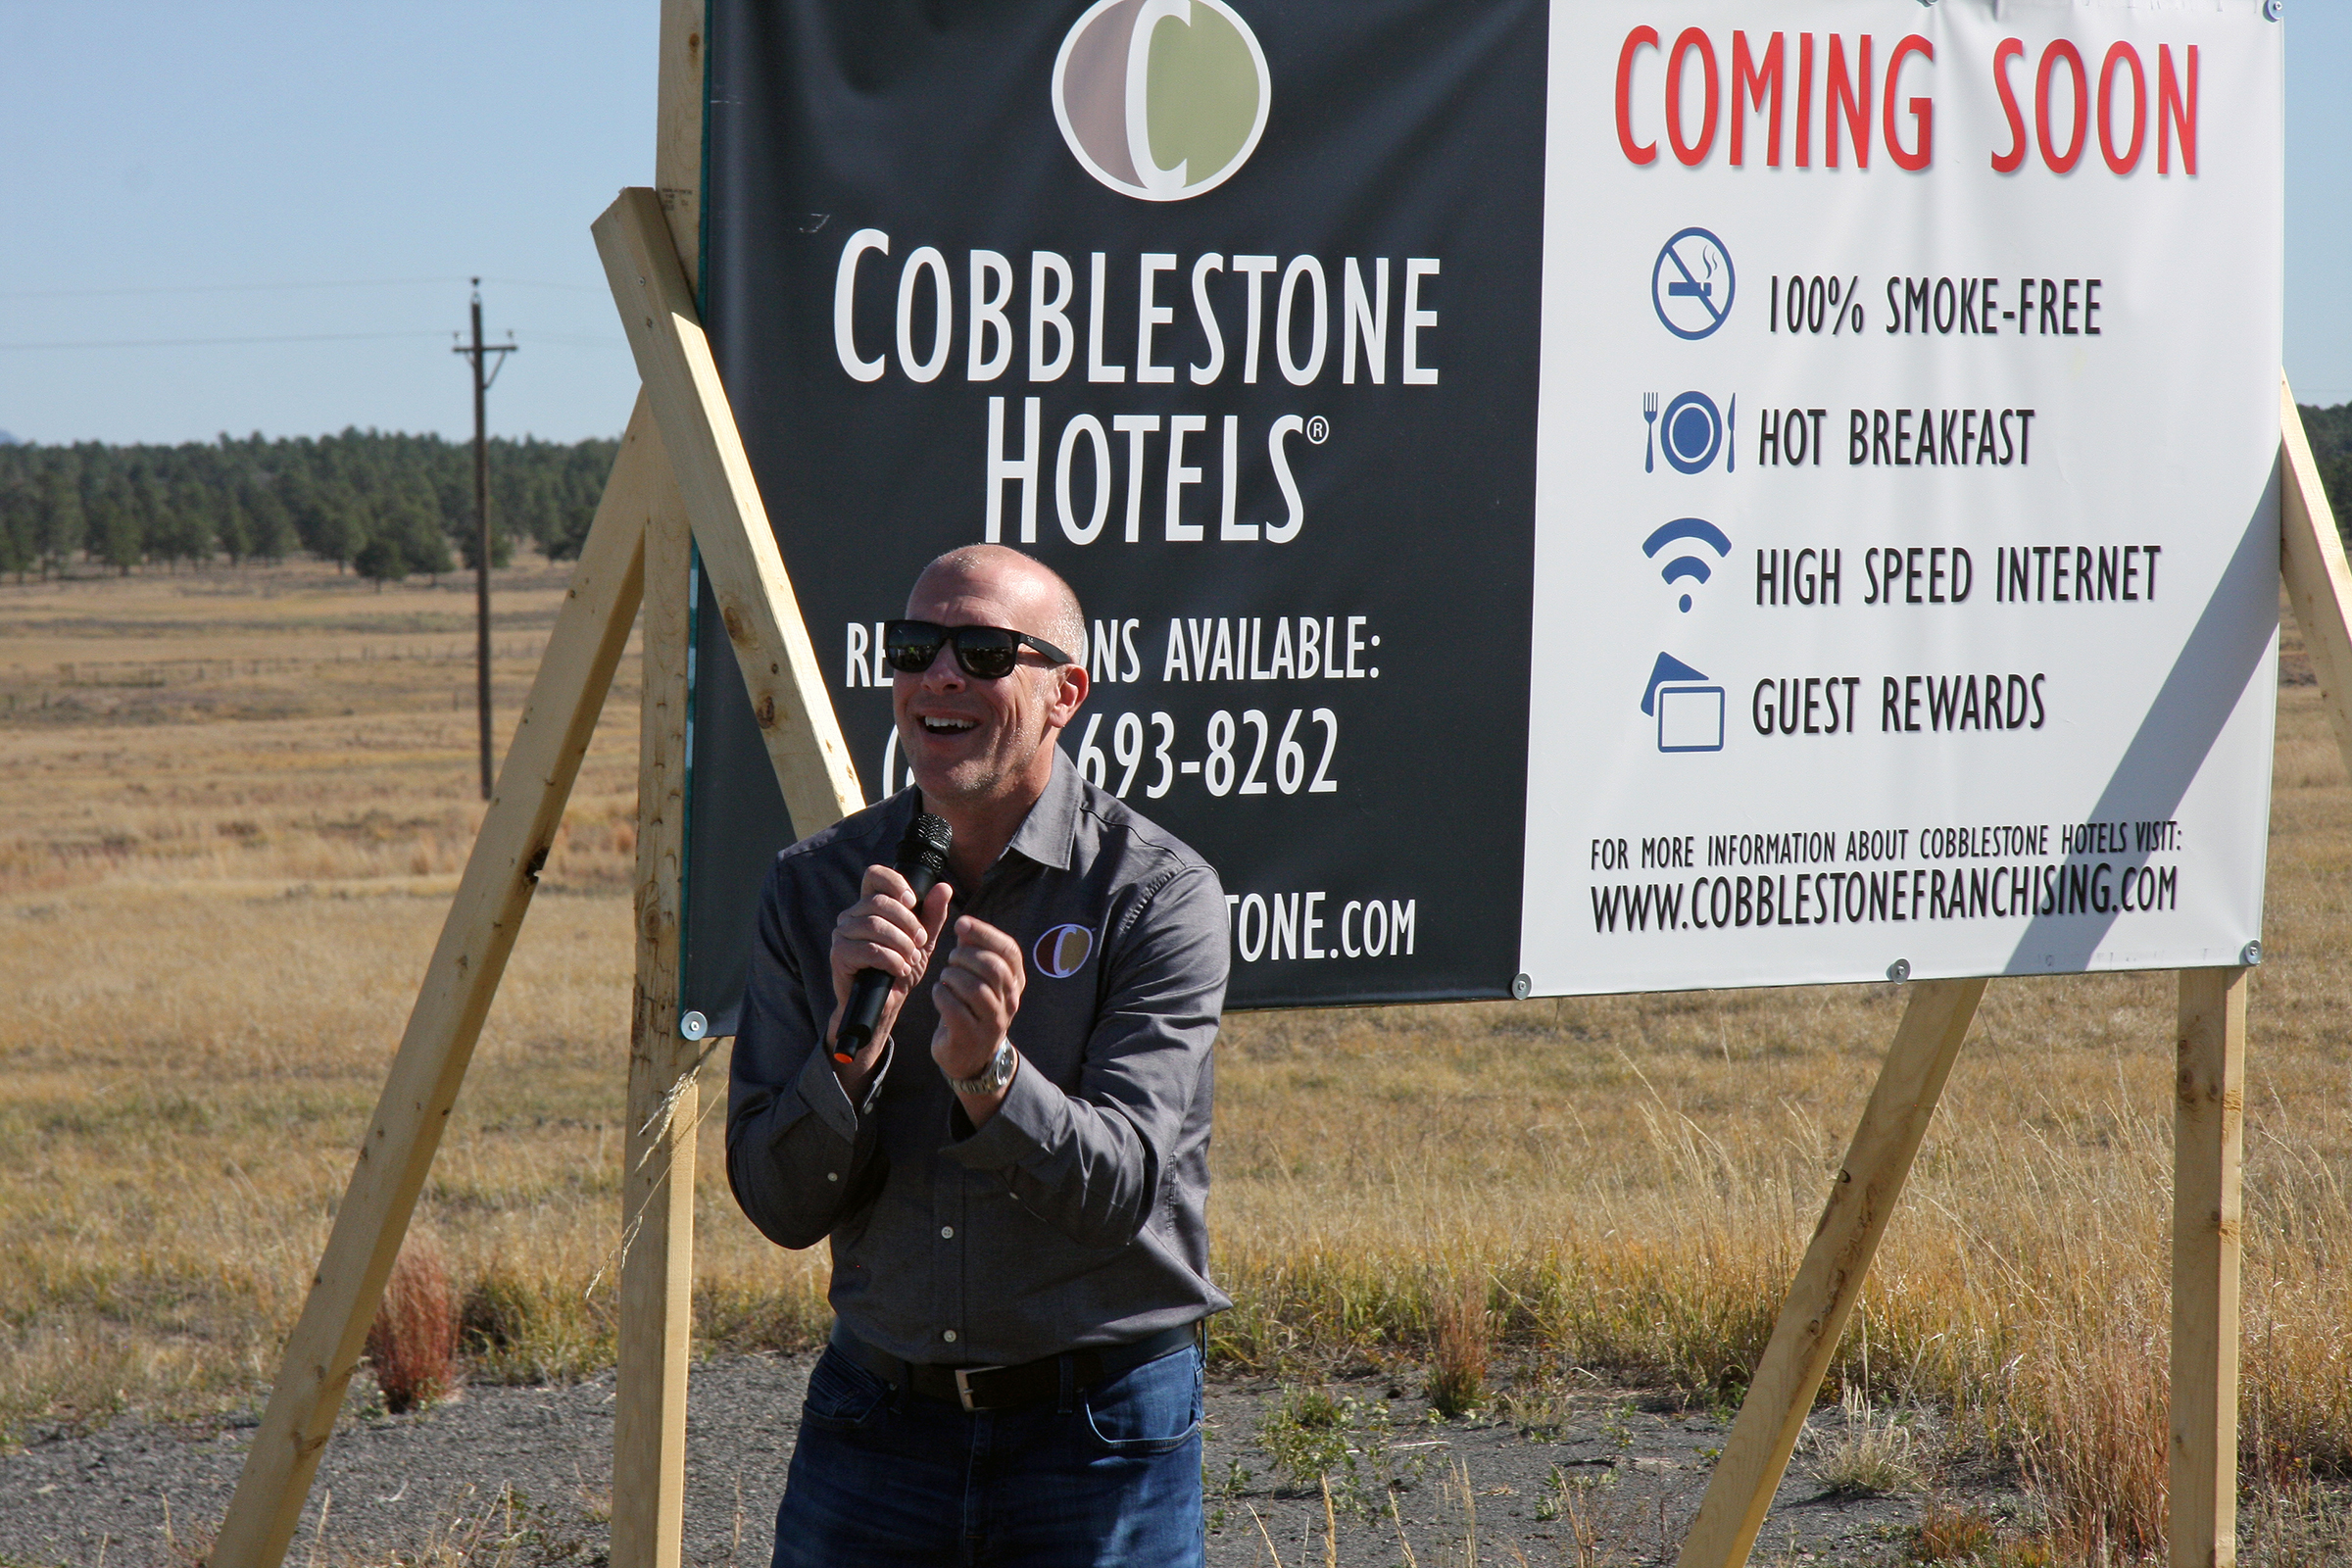 Cobblestone Inn & Suites CEO Brian Wogernese speaks with the crowd gathered for the ceremonial groundbreaking of a new hotel development project in Upton on Tuesday, October 5.